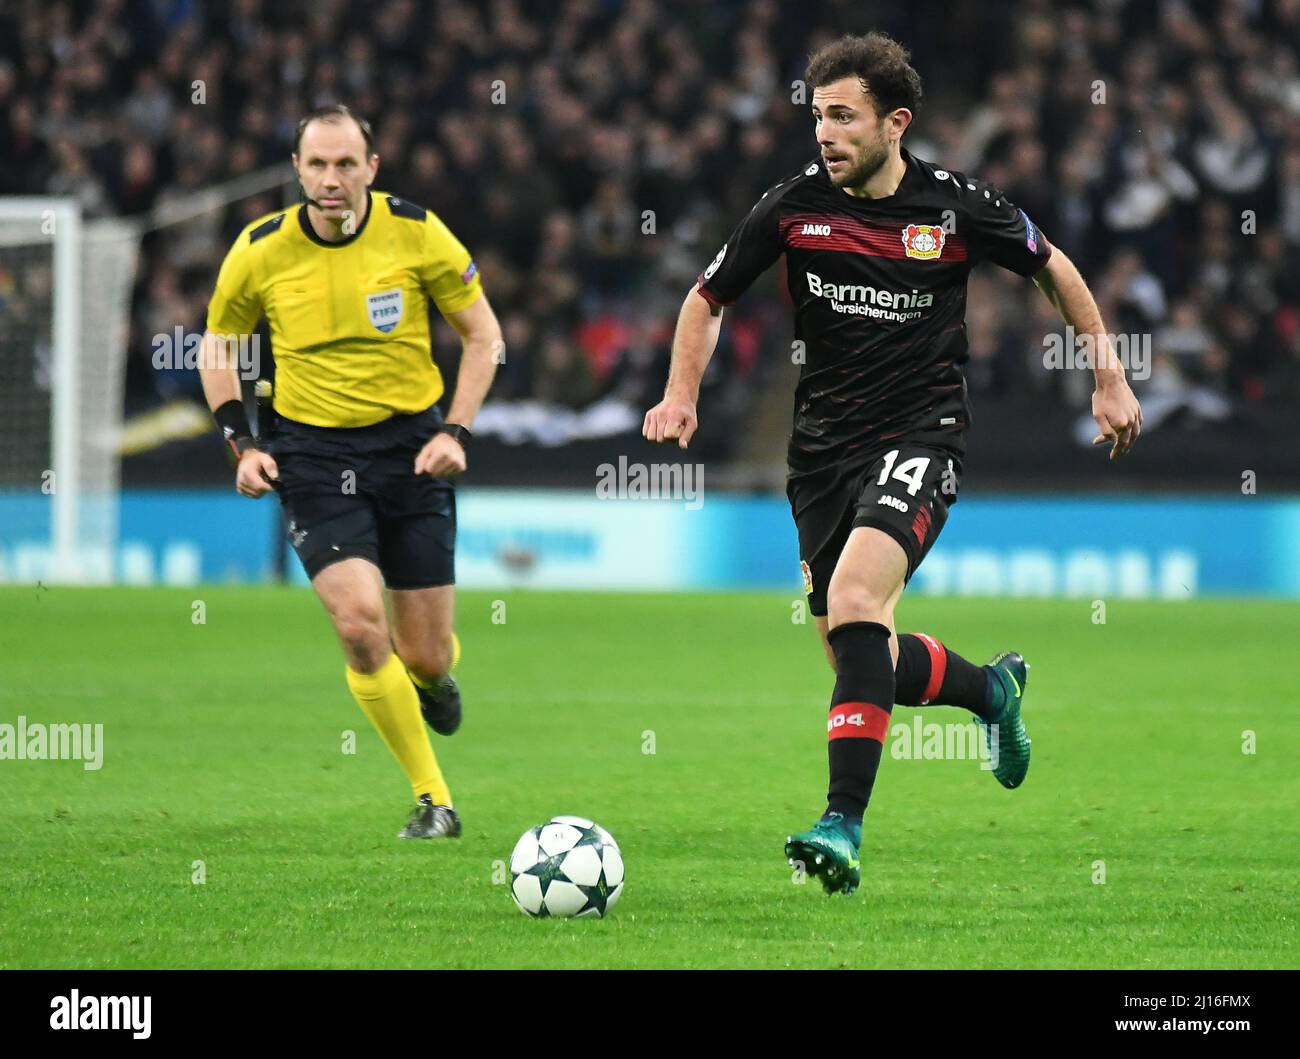 LONDON, ENGLAND - NOVEMBER 2, 2016: Admir Mehmedi of Leverkusen pictured in action during the UEFA Champions League Group E game between Tottenham Hotspur and Bayern Leverkusen at Wembley Stadium. Copyright: Cosmin Iftode/Picstaff Stock Photo